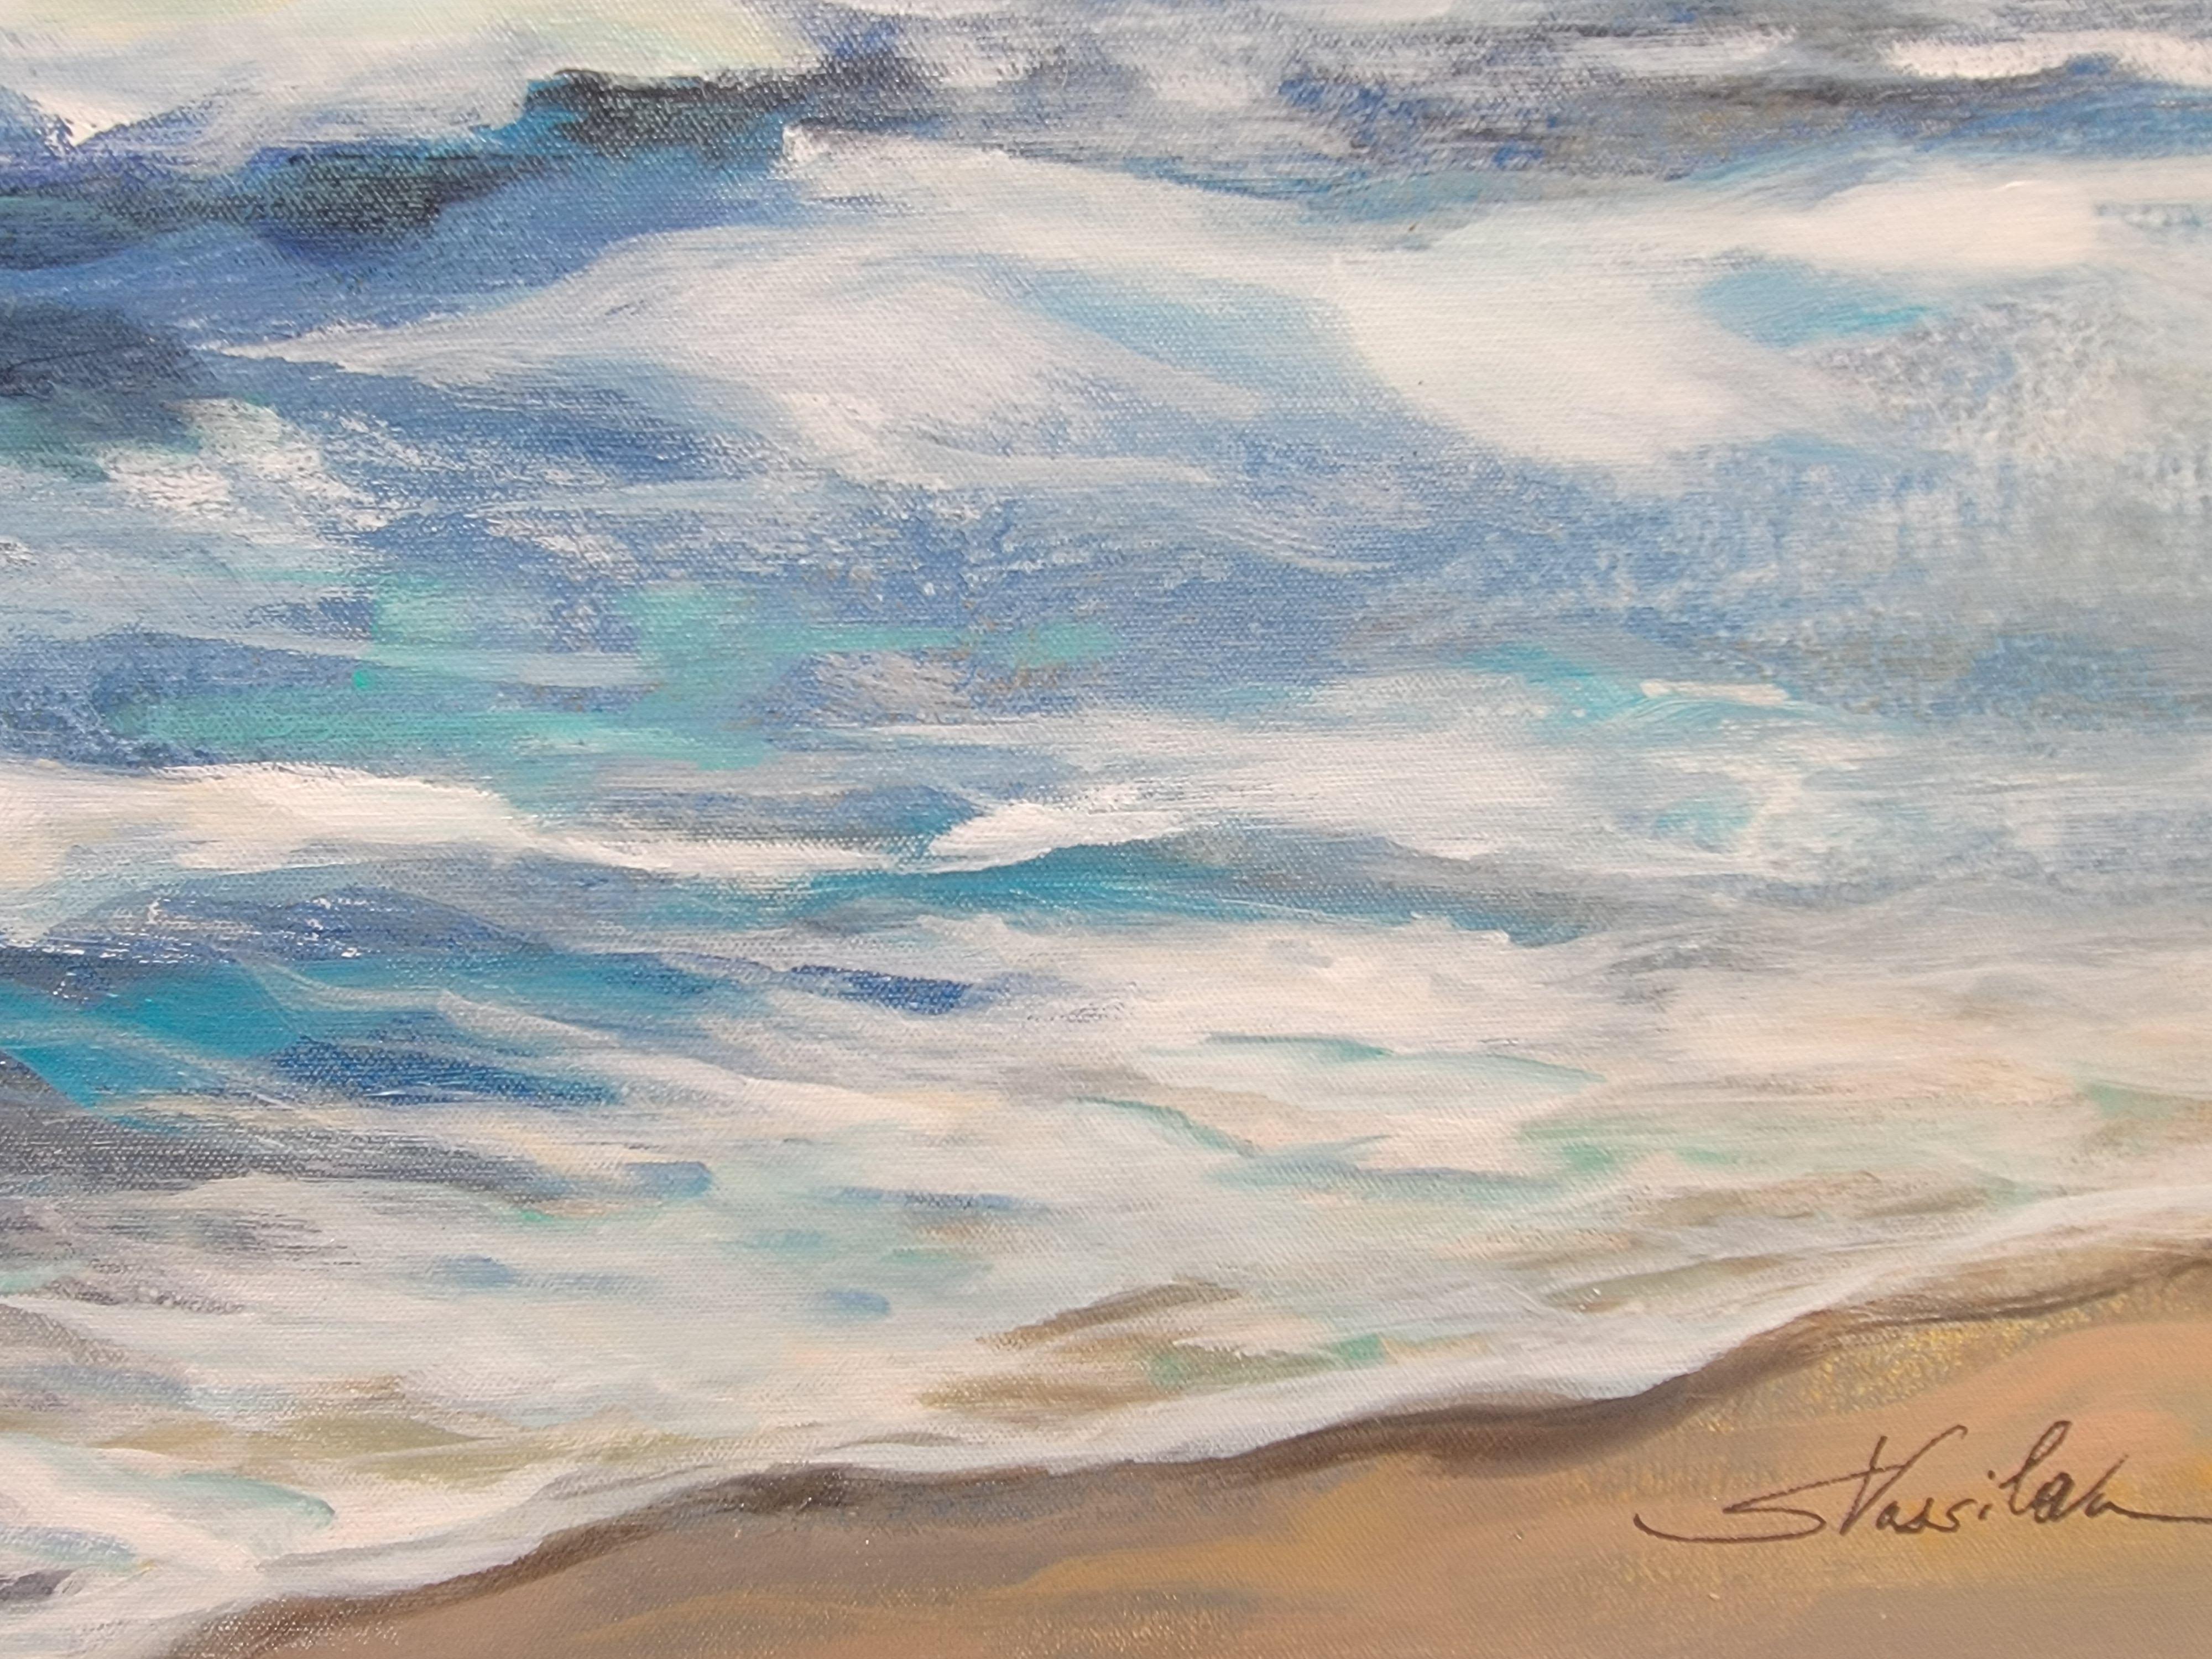 This oversize seascape is capturing the beauty of the sea and the movement of the waves. Simple blue and white color palette lets the viewer follow the reflections of the water and imagine the soothing sounds of the waves. The mood is serene. The